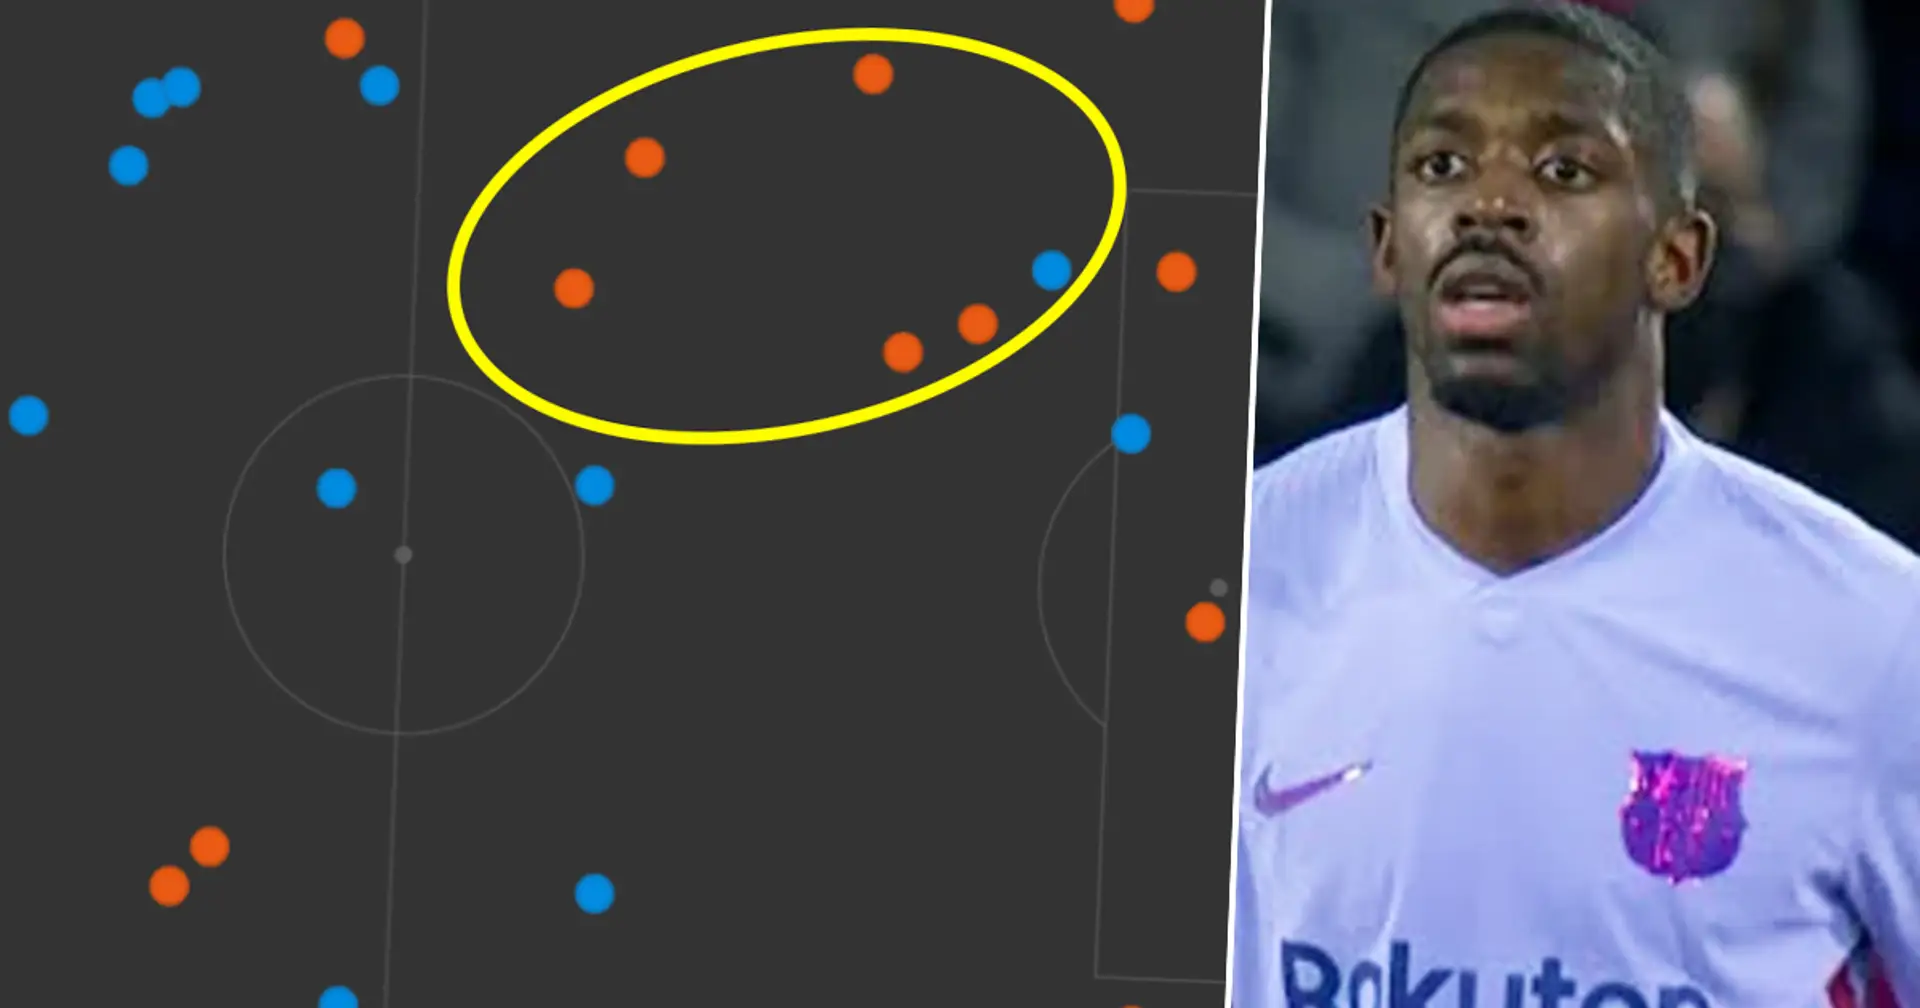 Dembele destroys right wing and 4 more things to take away from Barca's dribbling map v Levante